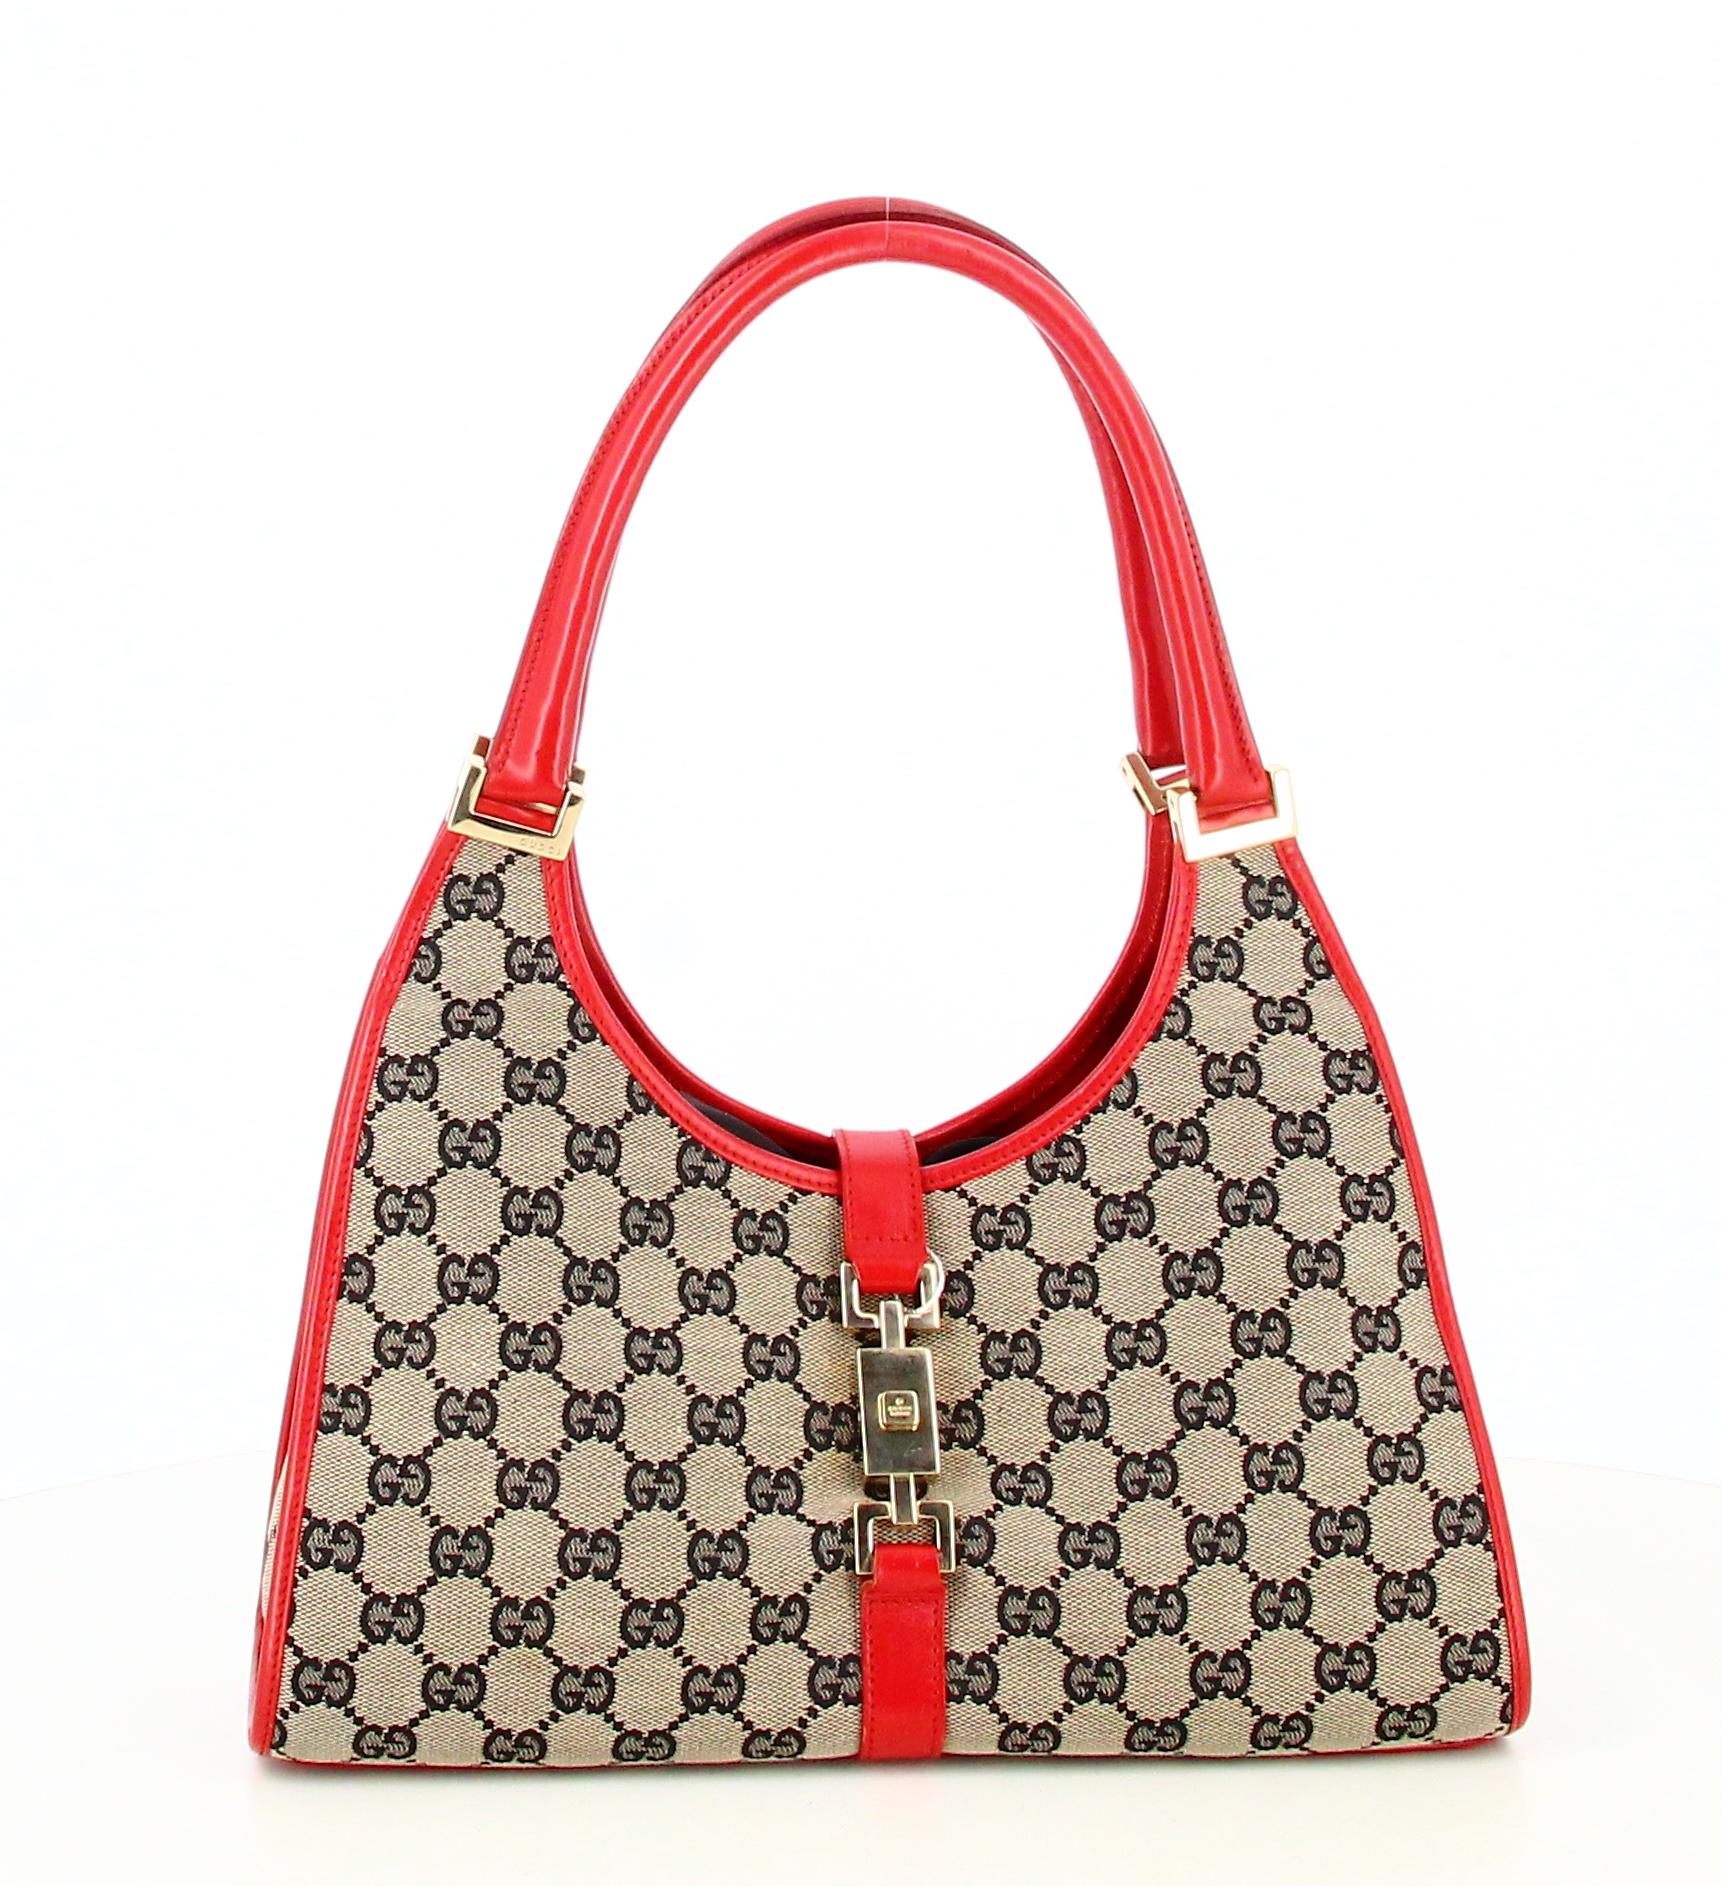 Gucci GG Canvas Handbag Jackie Bardot

- Very good condition. Shows slight signs of wear over time. 
- Gucci Handbag 
- Monogram canvas
- Beige colour and red leather 
- Inside: red leather and black fabric plus a small inside pocket 
- Two red